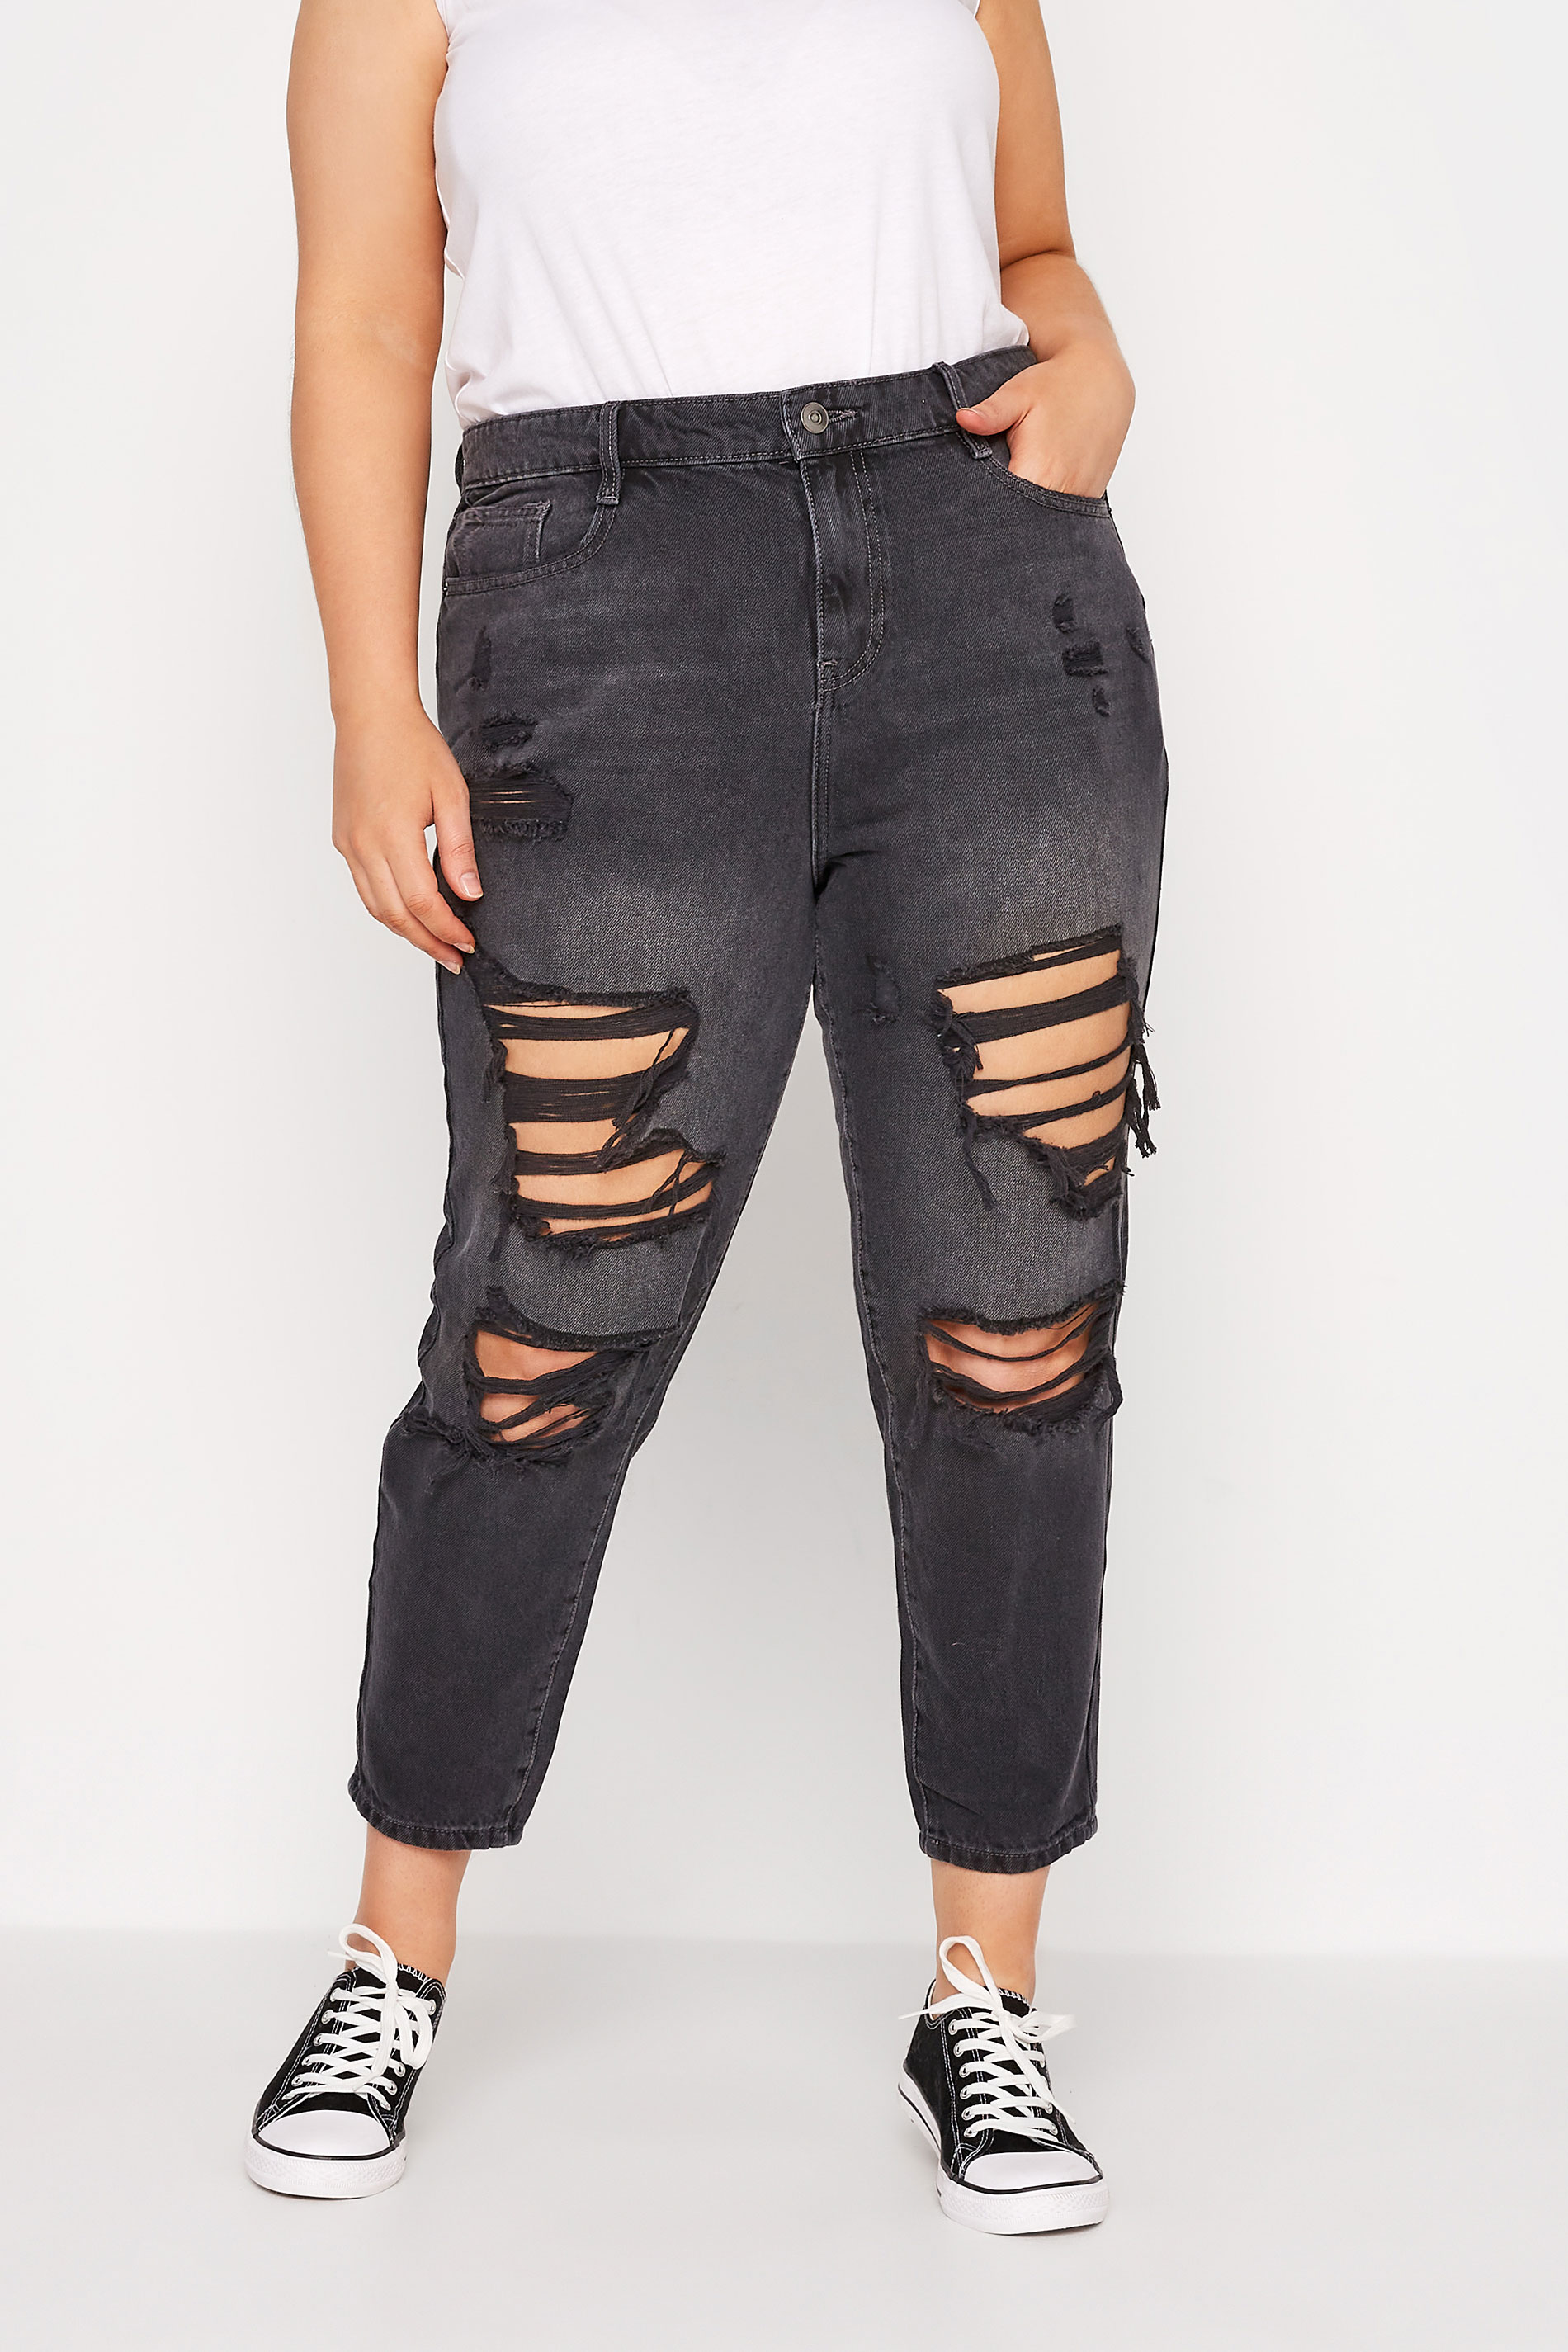 YOURS FOR GOOD Curve Black Extreme Distressed MOM Jeans_B.jpg